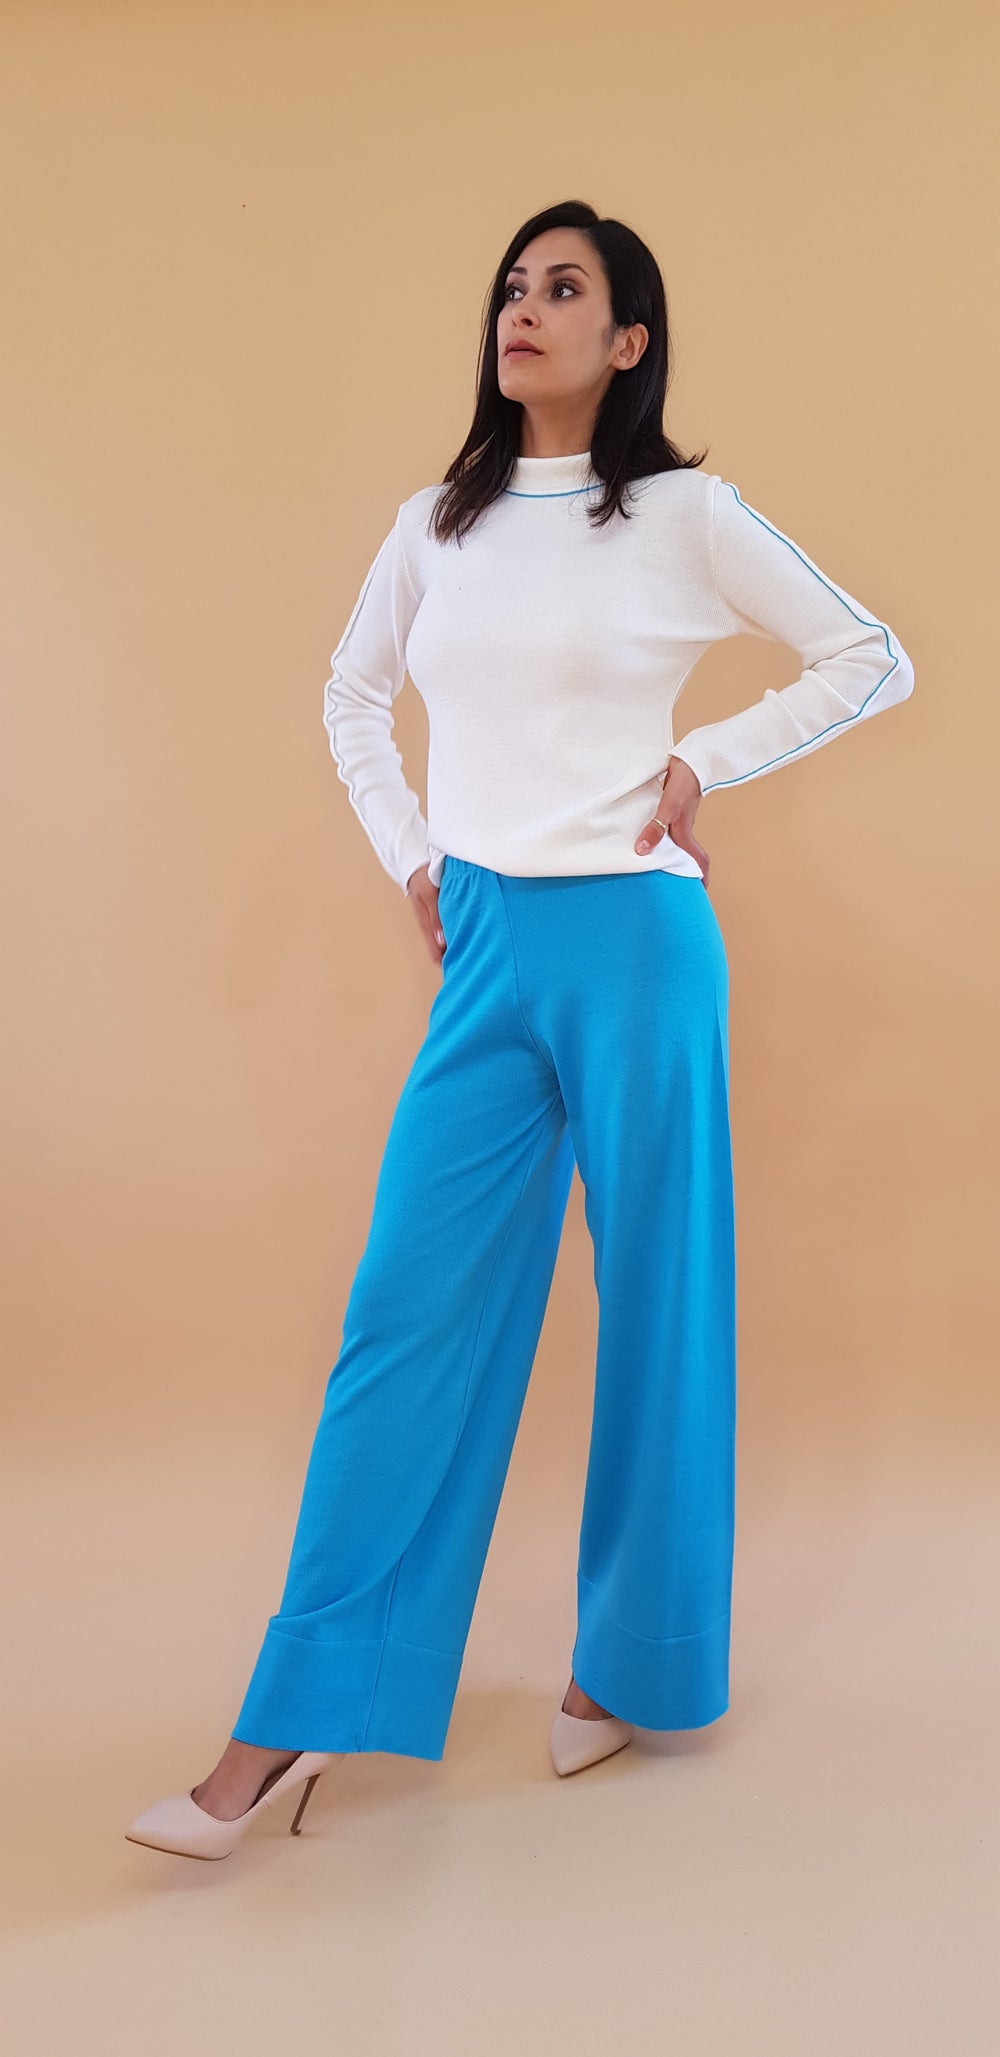 Woman wearing a white sweater and blue wide-leg pants against a beige background